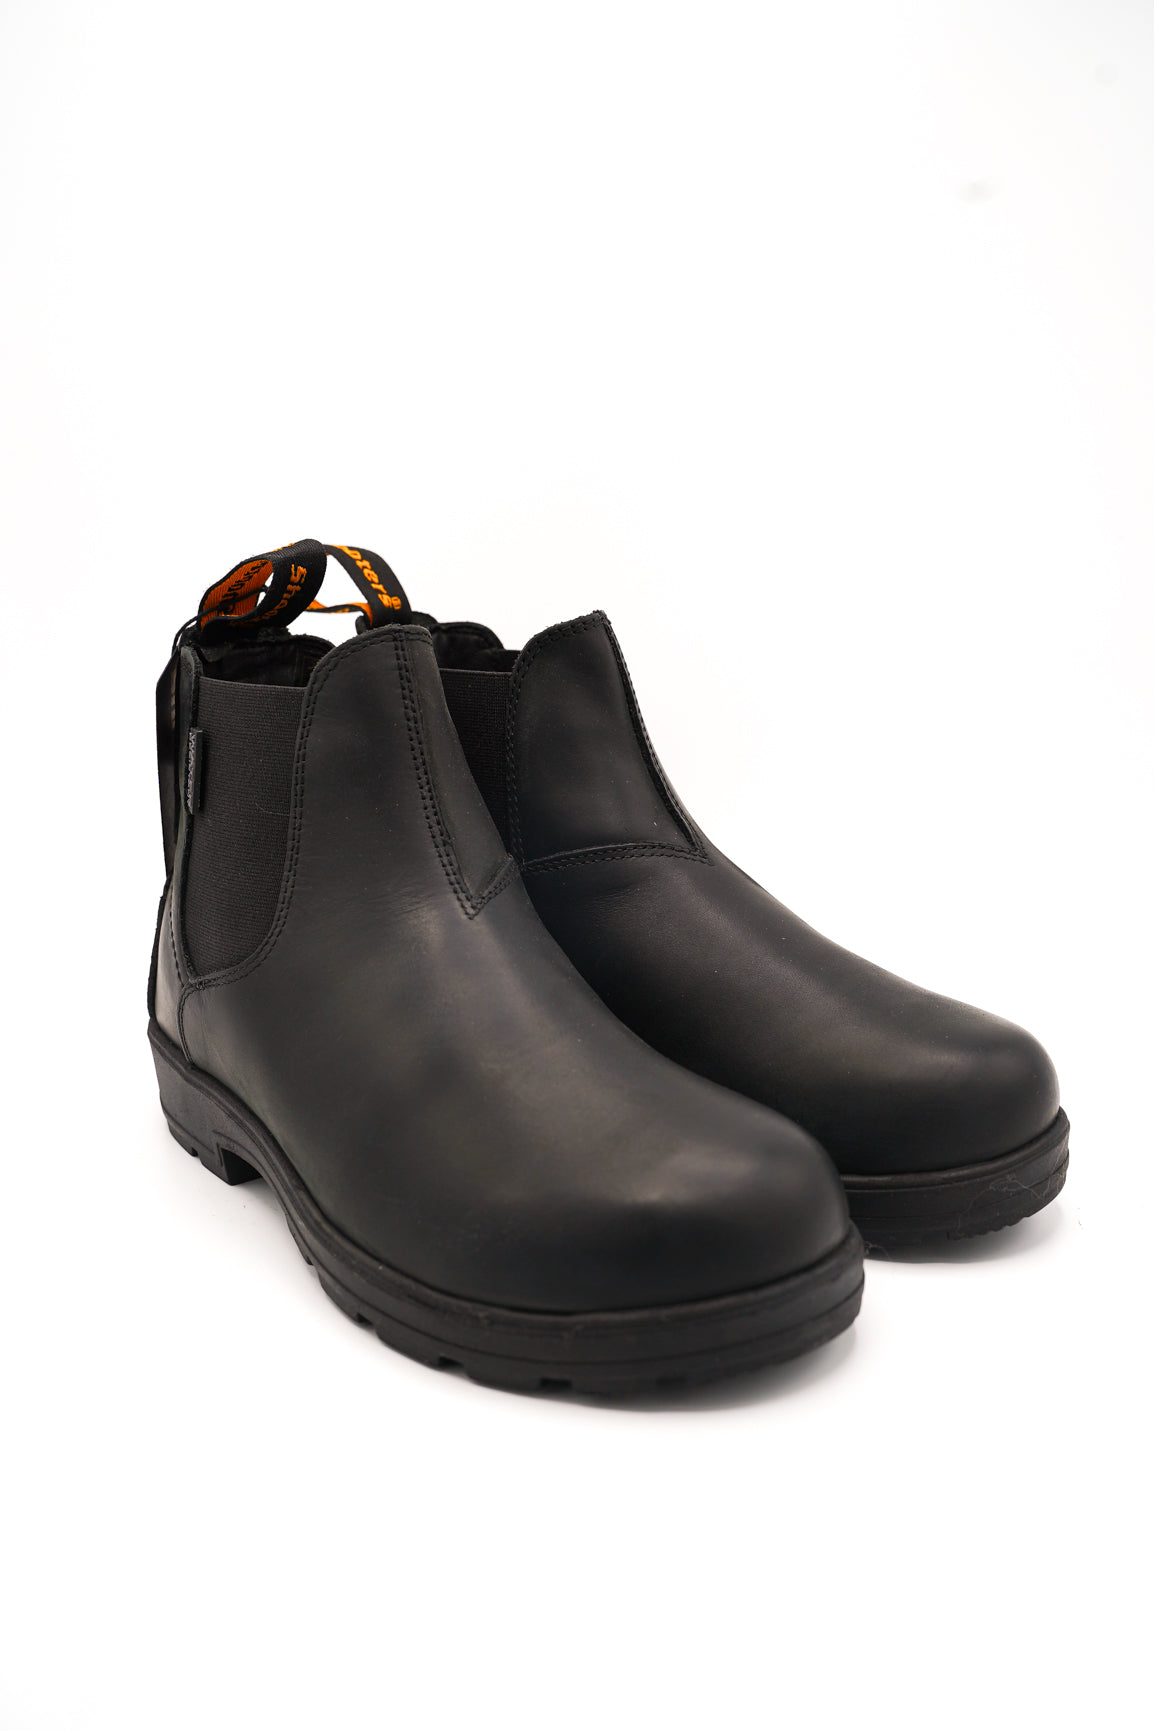 Shooters stivaletto UOMO 19132-06 – Angeloshoes